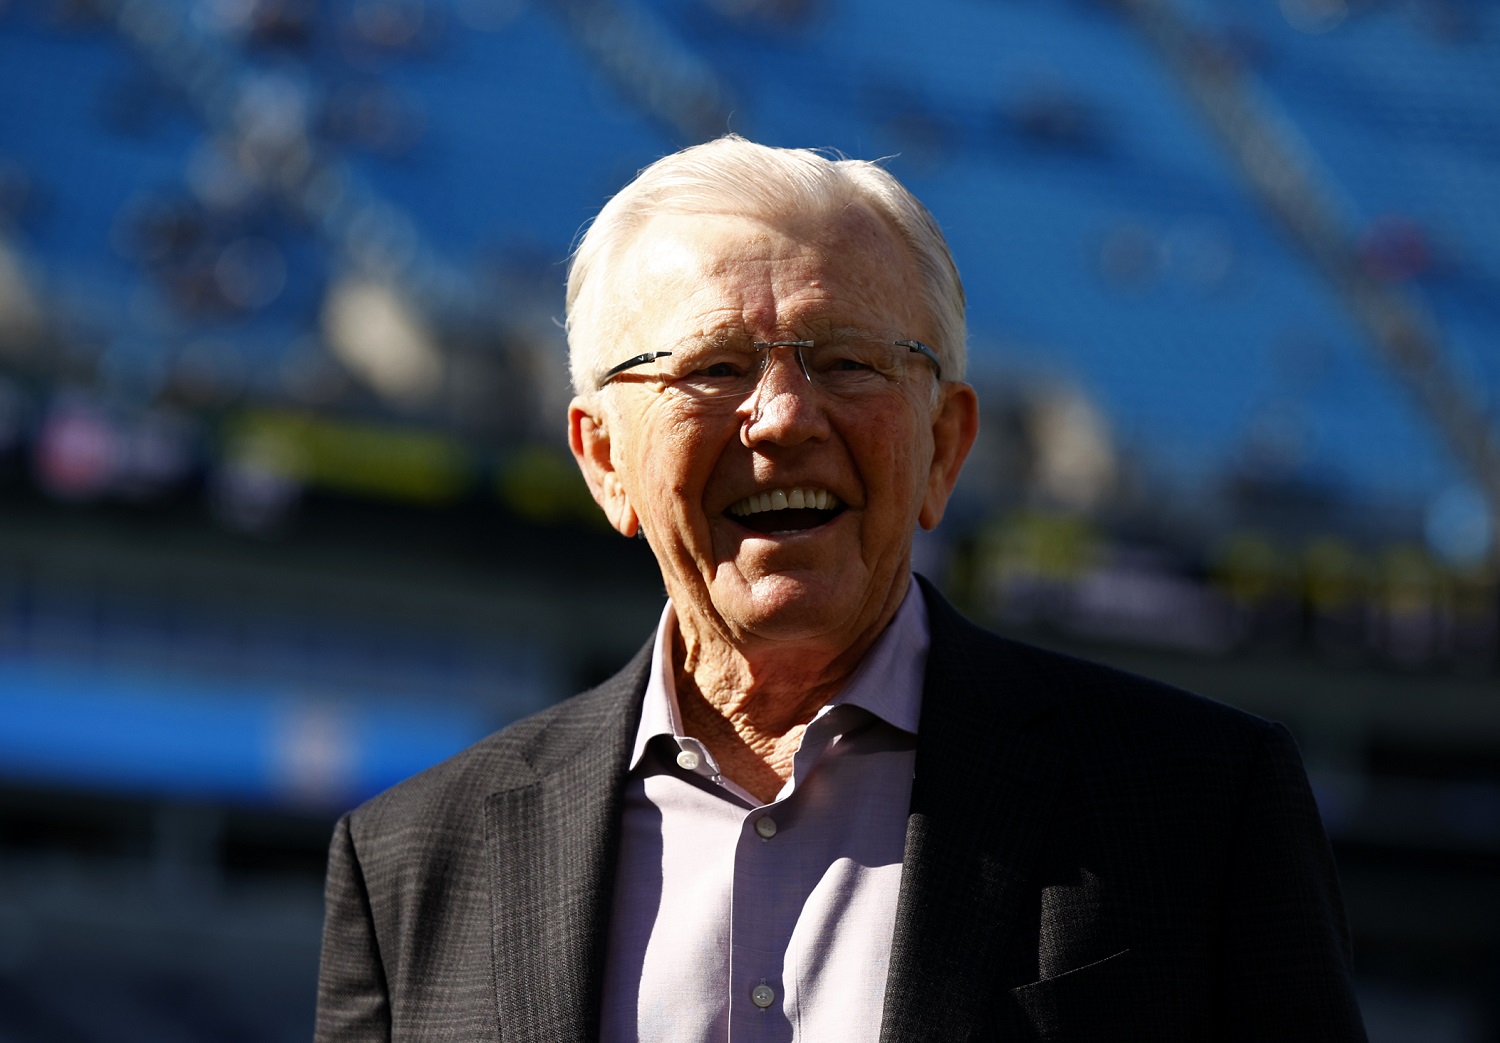 NASCAR owner and Hall of Famer Joe Gibbs looks on prior to the NFL game between the Carolina Panthers and the Atlanta Falcons at Bank of America Stadium on Dec. 12, 2021, in Charlotte, North Carolina. | Jared C. Tilton/Getty Images